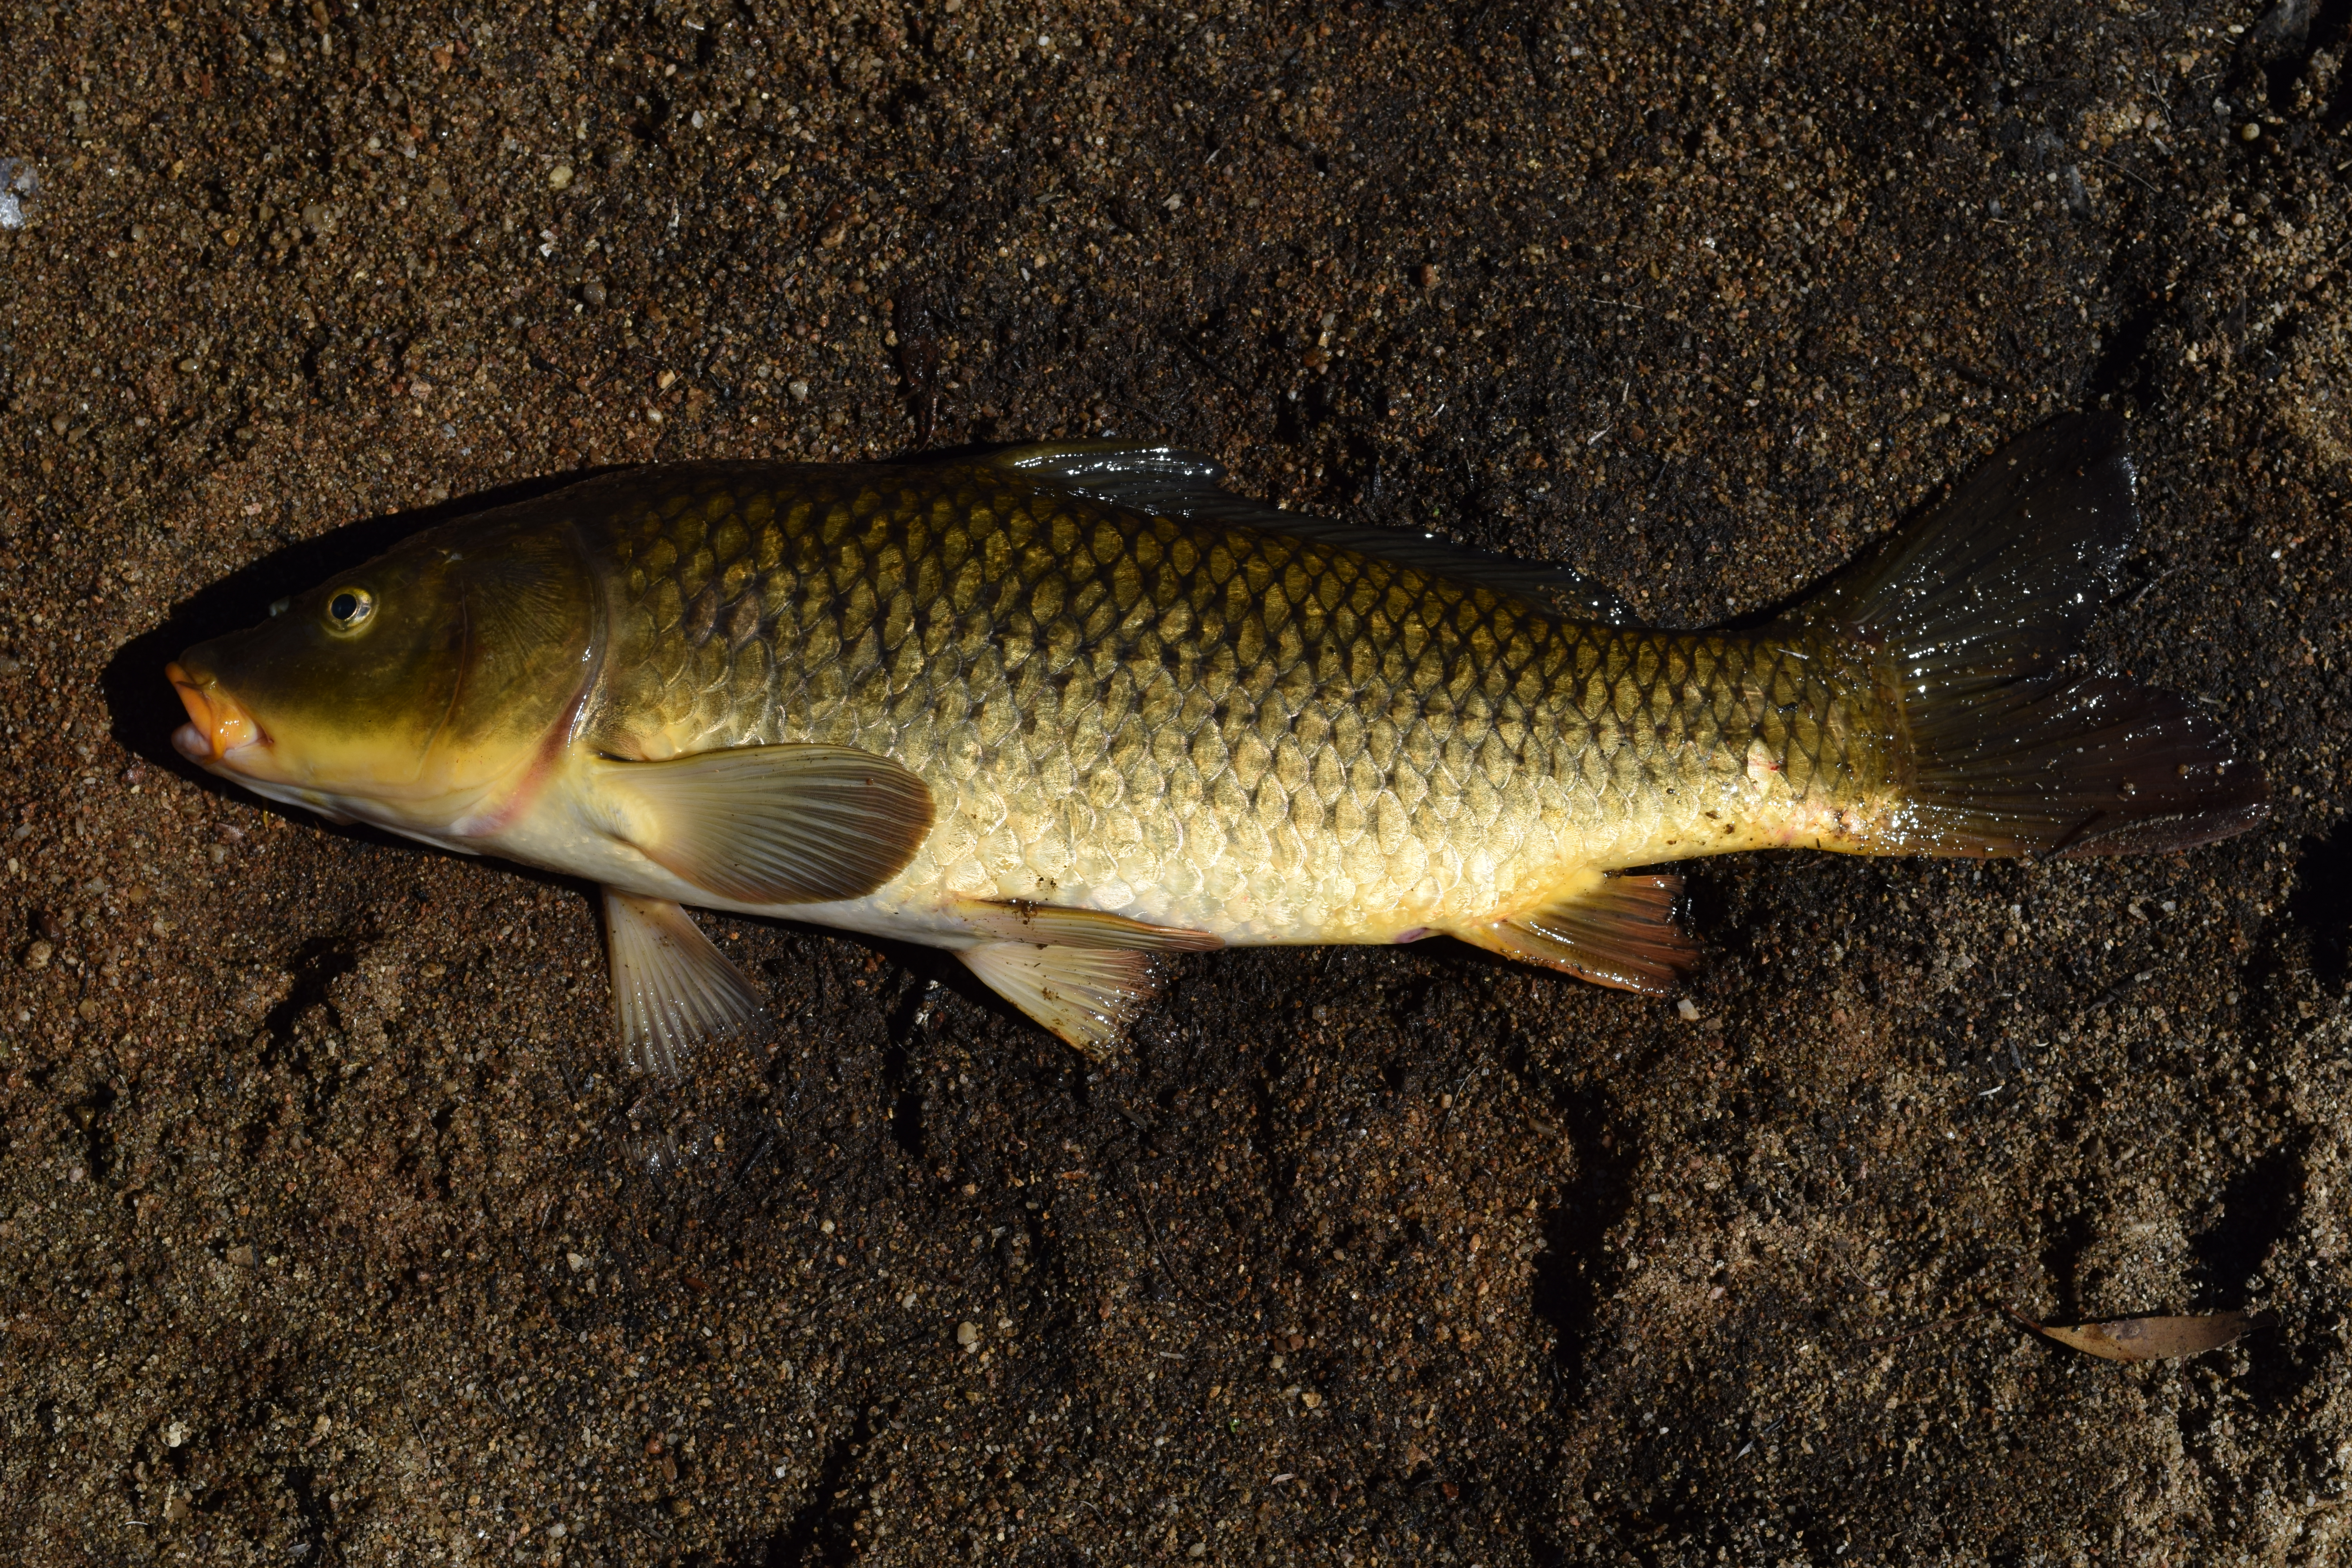 dismissed-by-many-however-carp-are-tasty-when-handled-properly